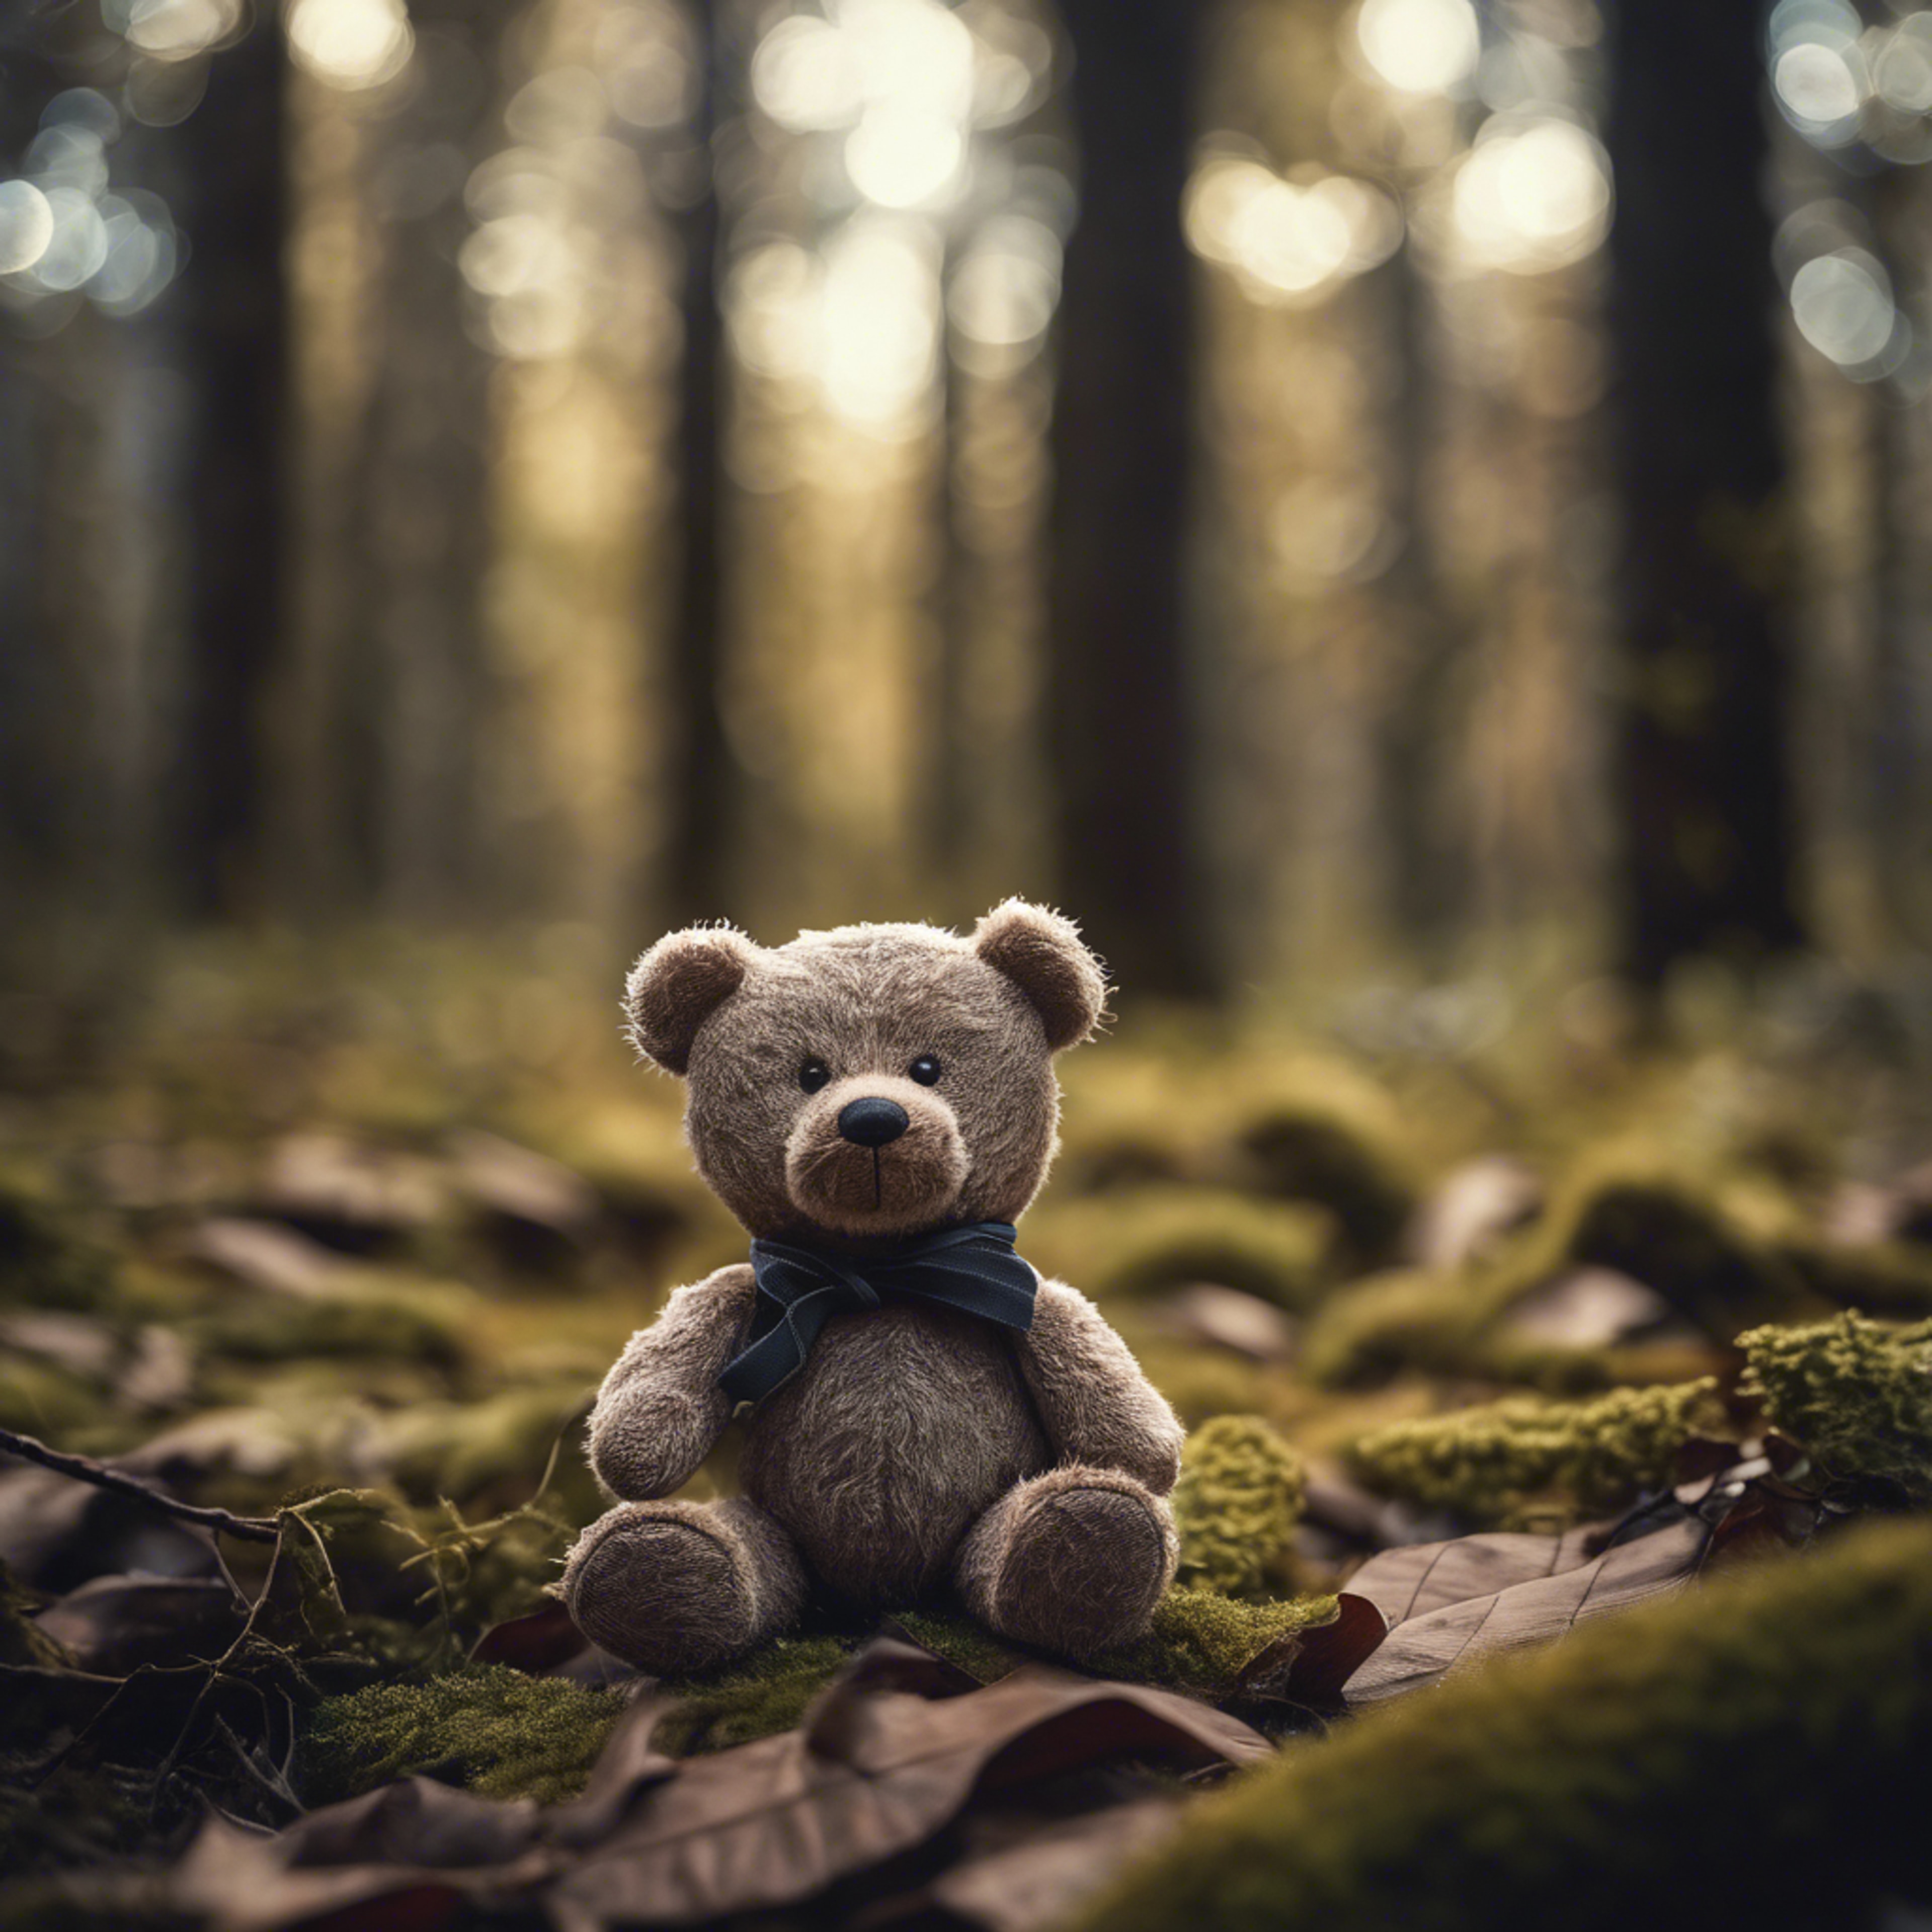 A teddy bear lost and alone in a dark forest. Taustakuva[4d225efade314682baea]